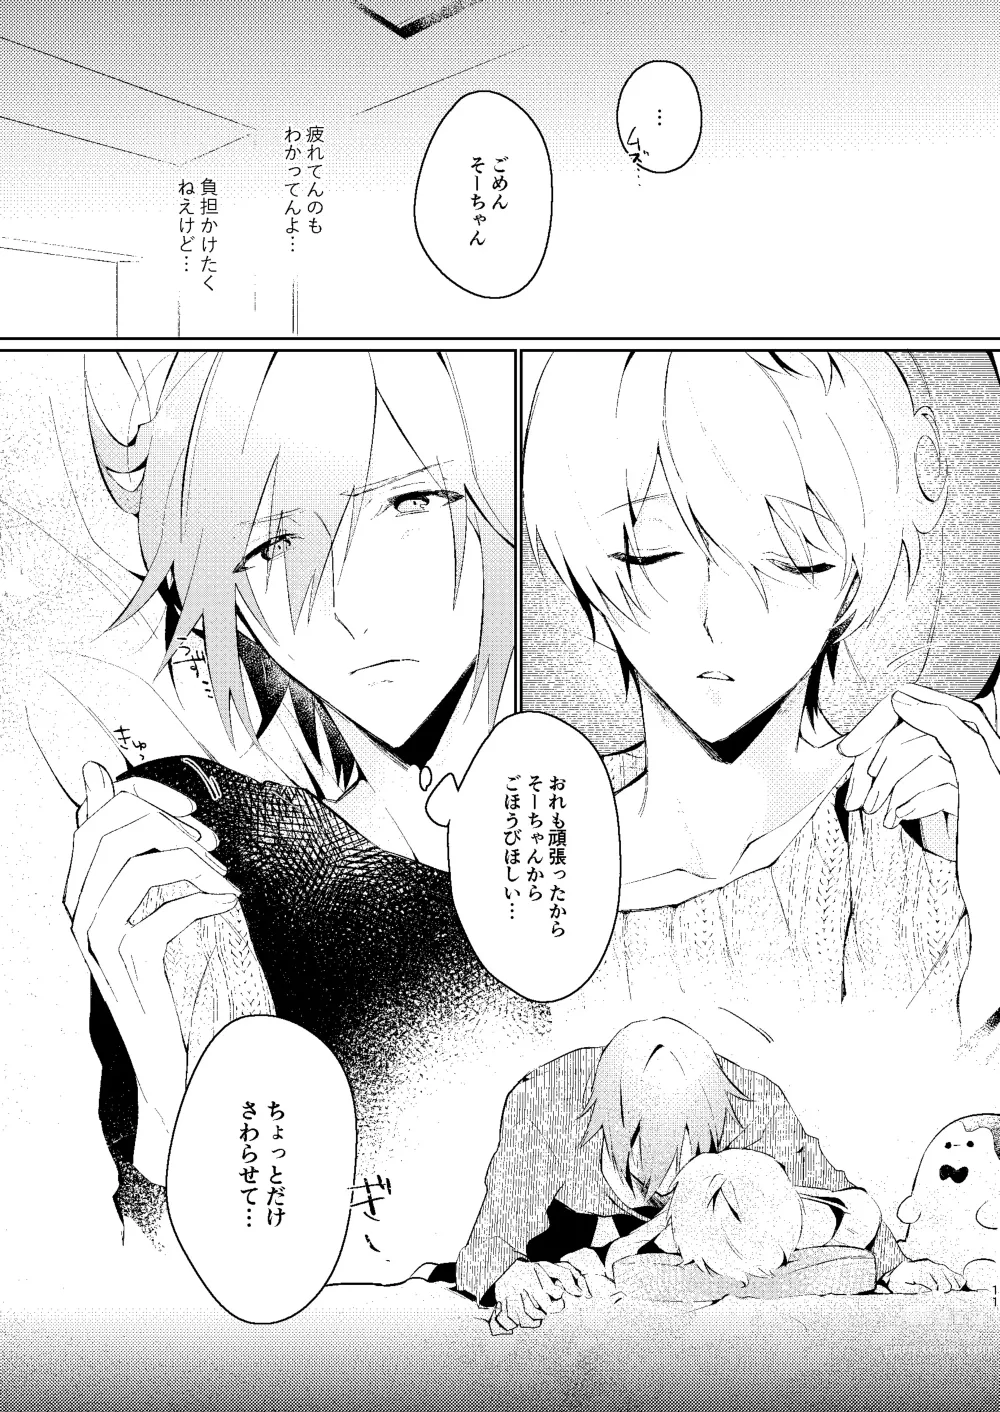 Page 10 of doujinshi Love you in a Dream